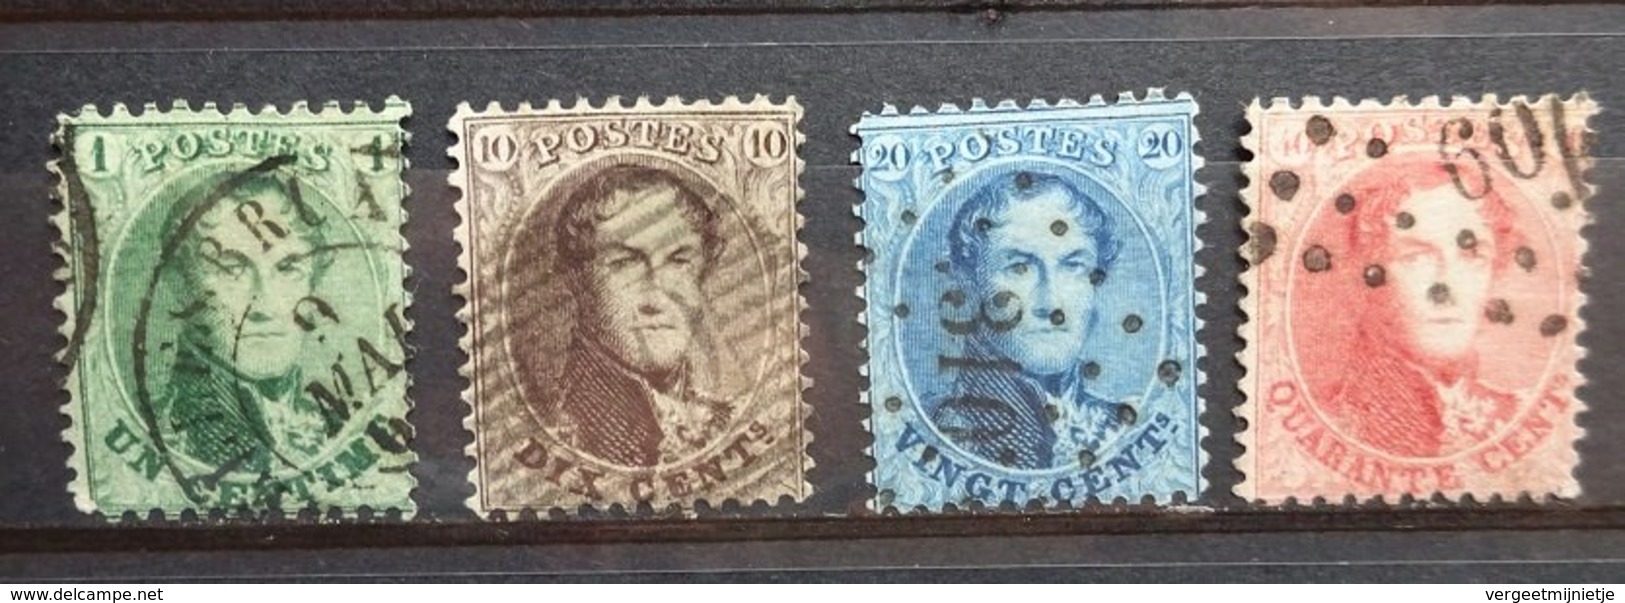 BELGIE  1863     Nr. 13 A - 16 A  Tand. 13 1/2  (3)    Gestempeld   CW  79,00 - 1863-1864 Medaillons (13/16)